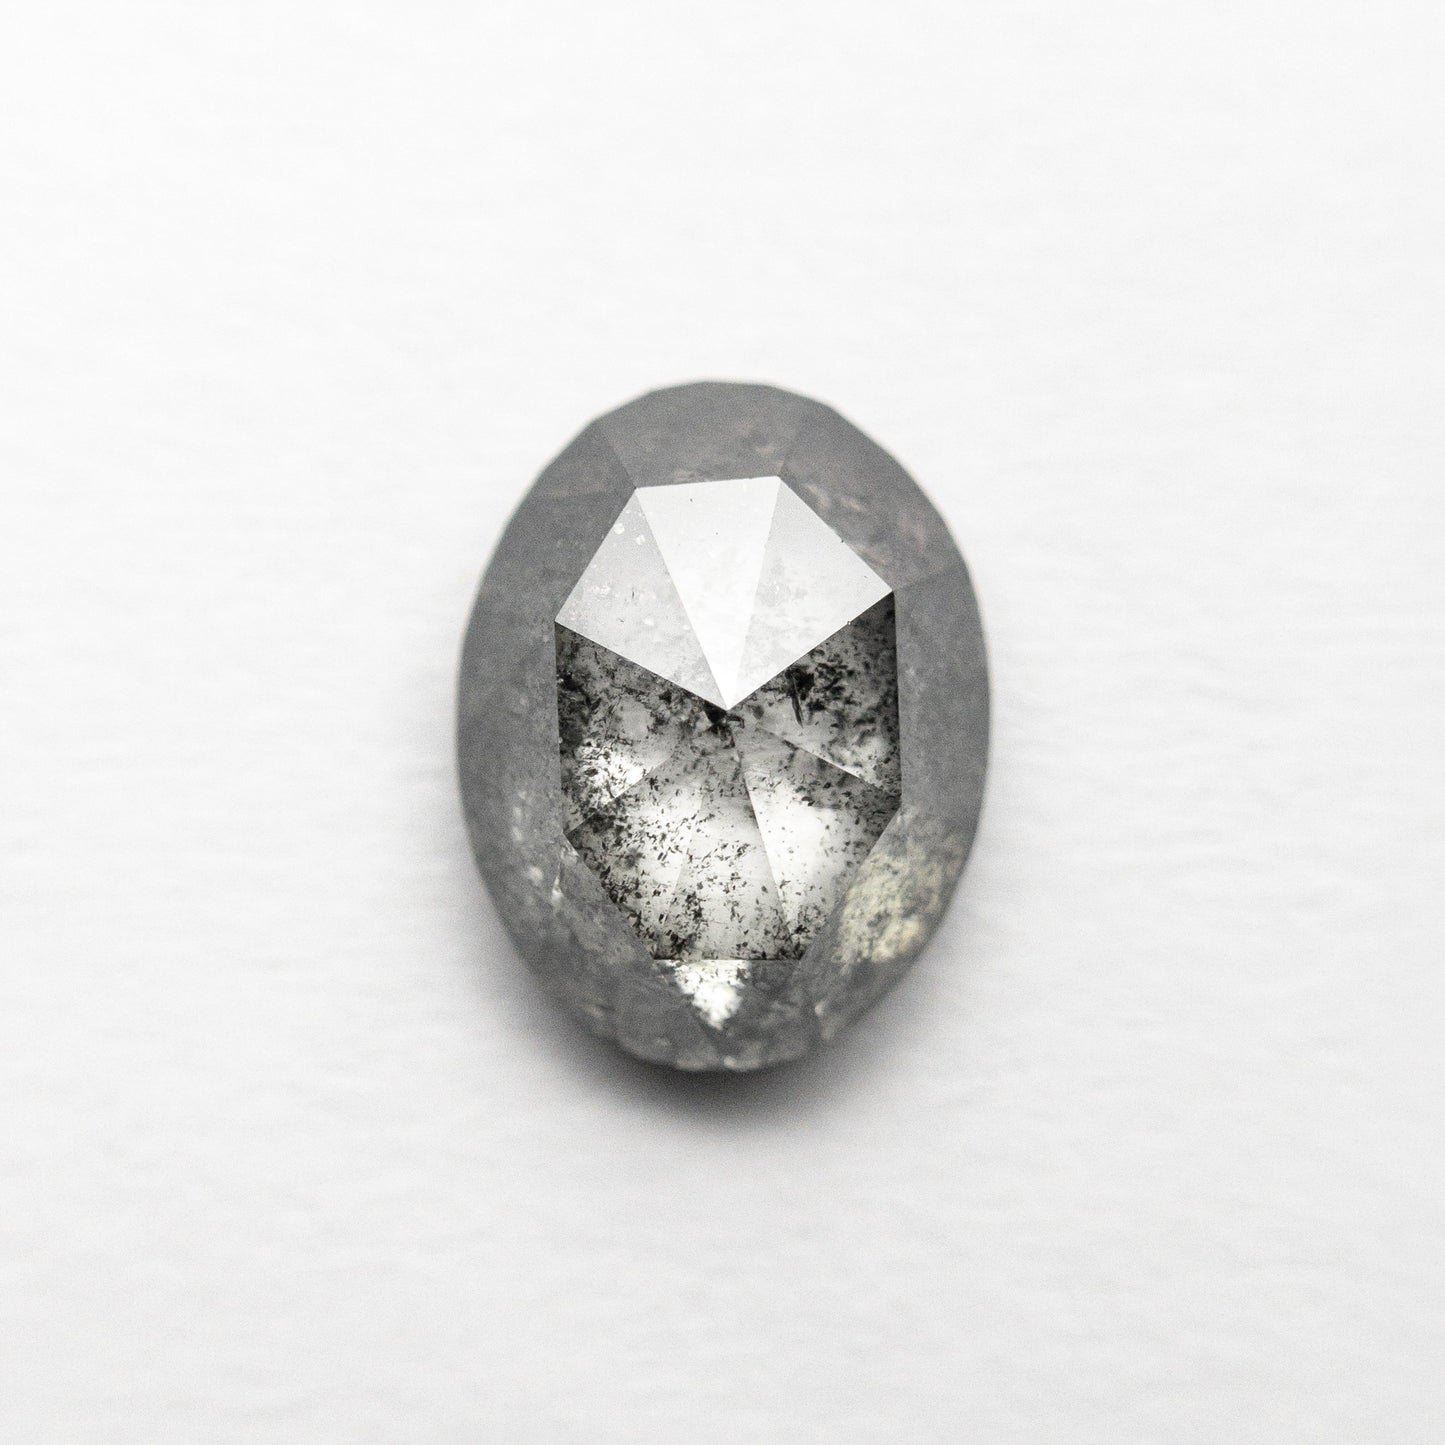 1.67ct 7.96x6.21x3.88mm Oval Double Cut 18904-17